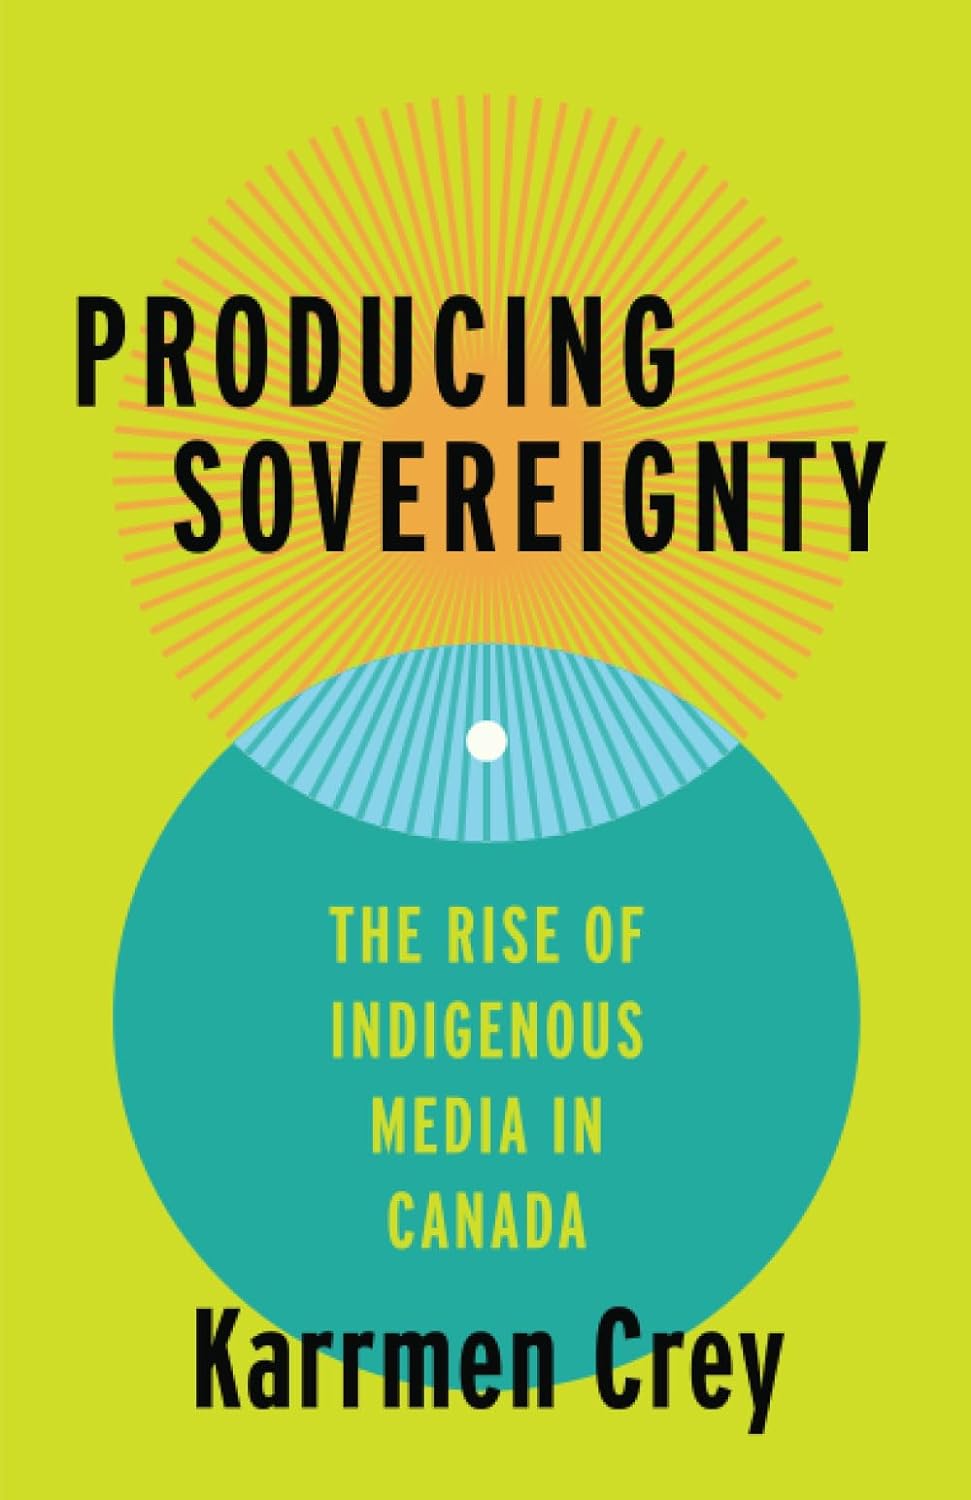 Producing Sovereignty: The Rise of Indigenous Media in Canada by Karrmen Crey